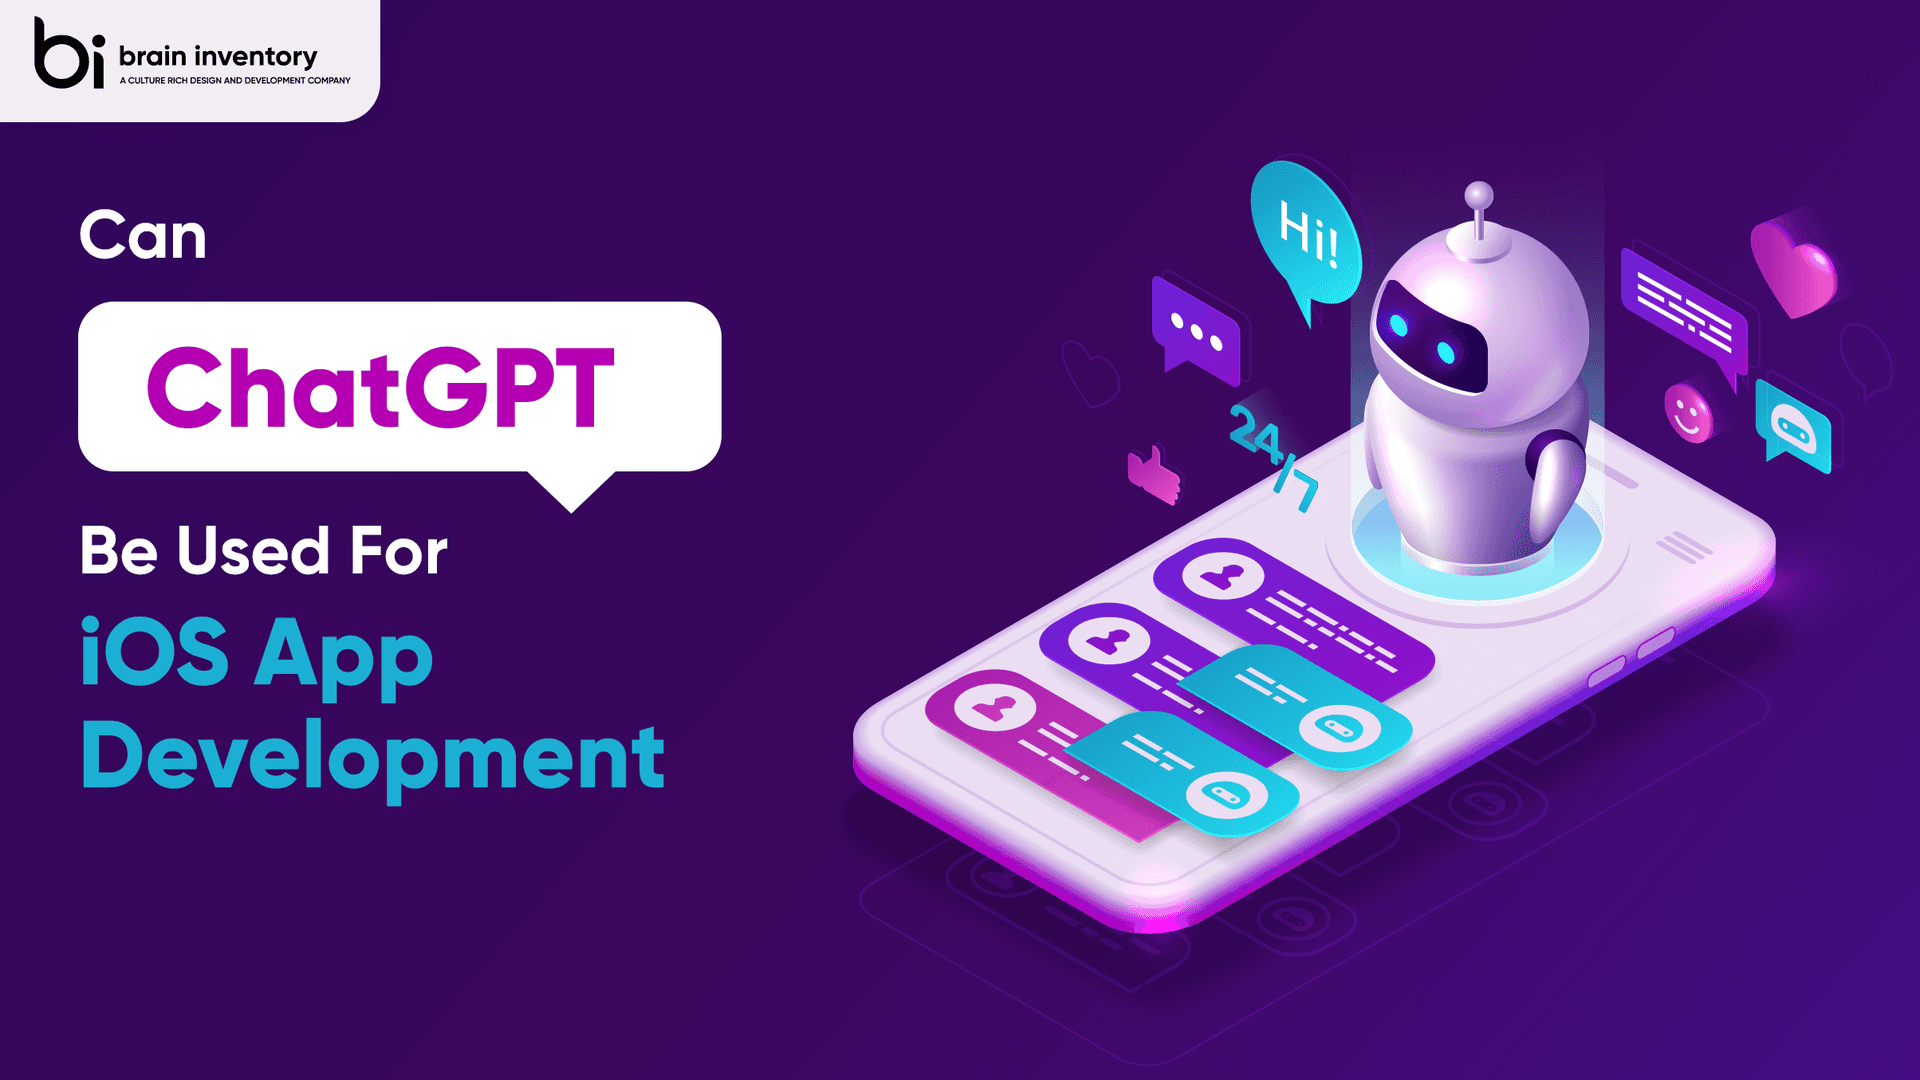 Can ChatGPT Be Used For iOS App Development?